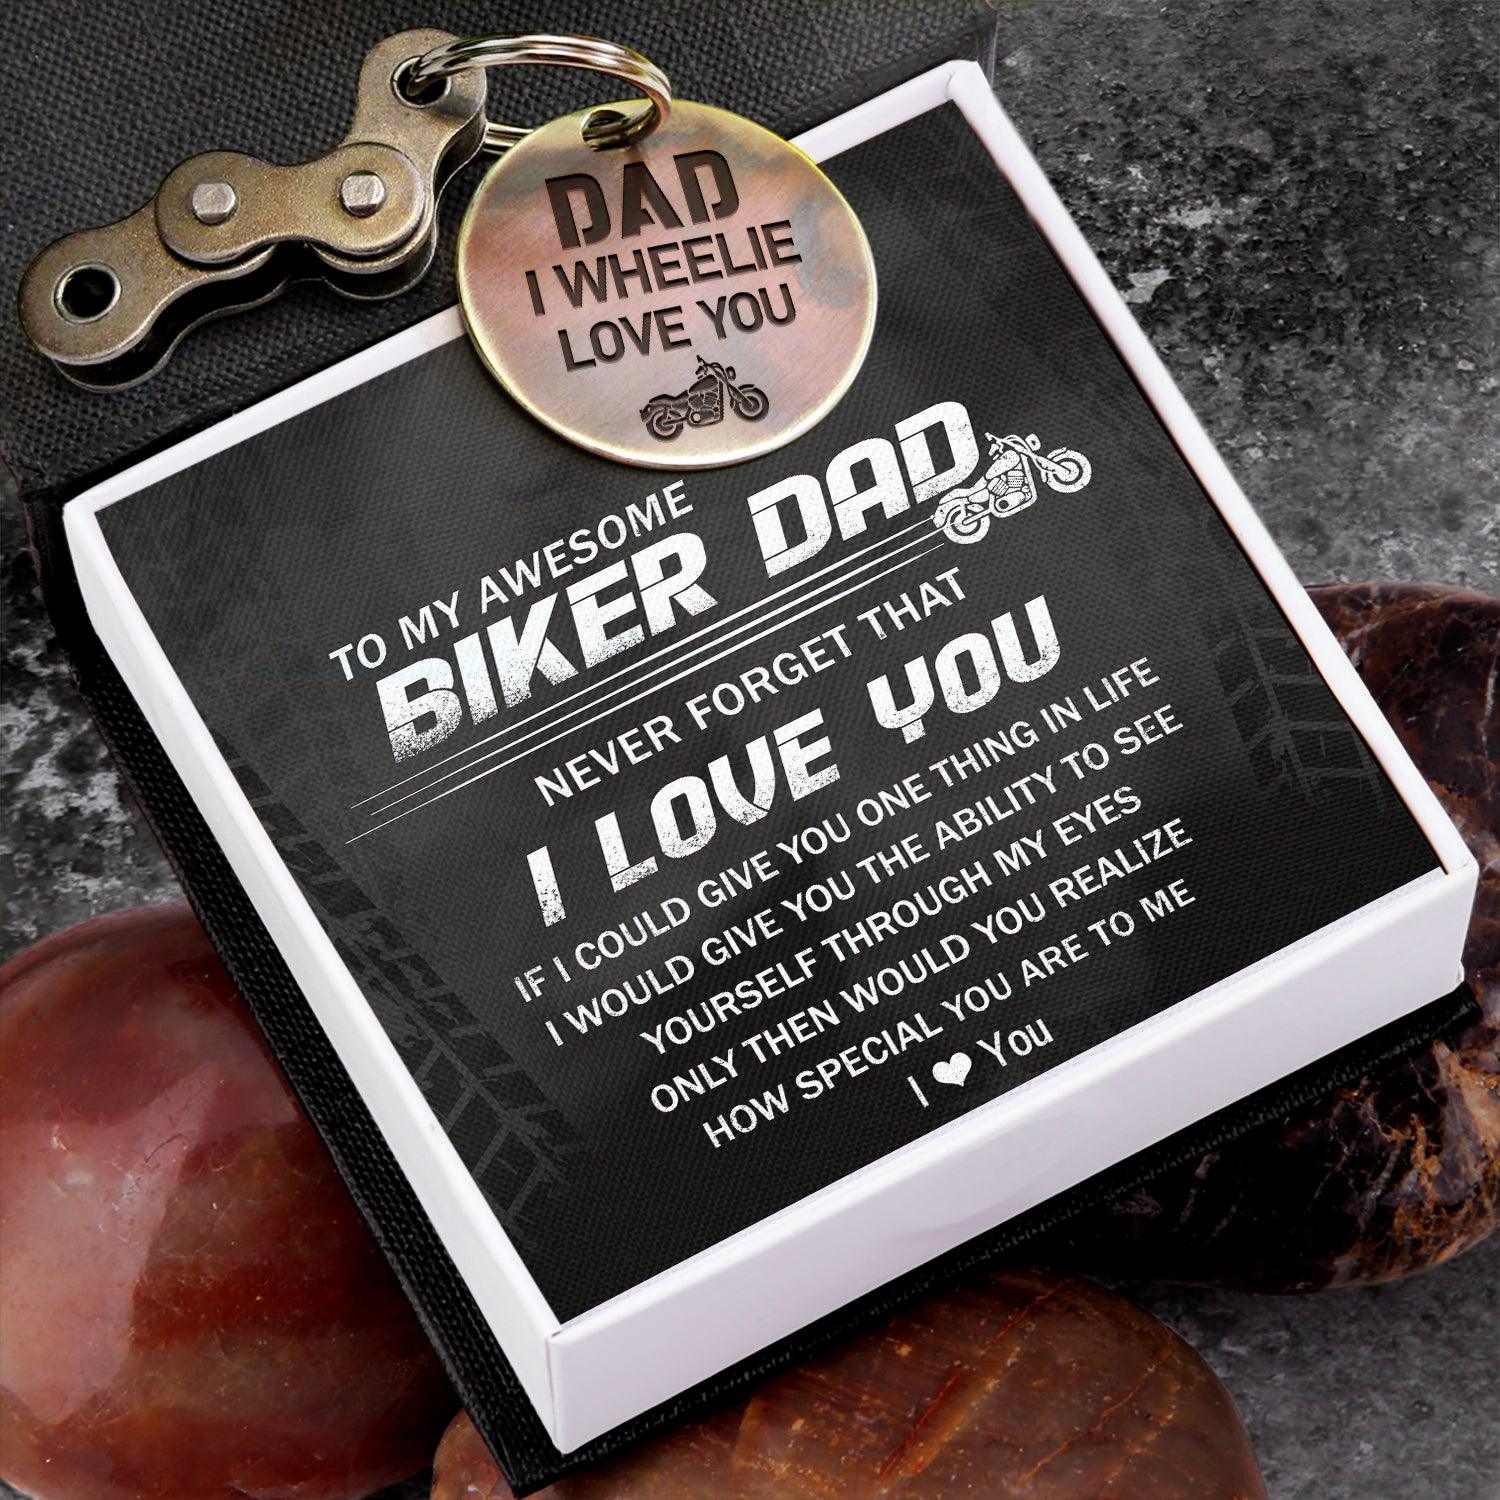 Motocross Keychain - To My Awesome Biker Dad - I Wheelie Love You - Augkbf18001 - Gifts Holder